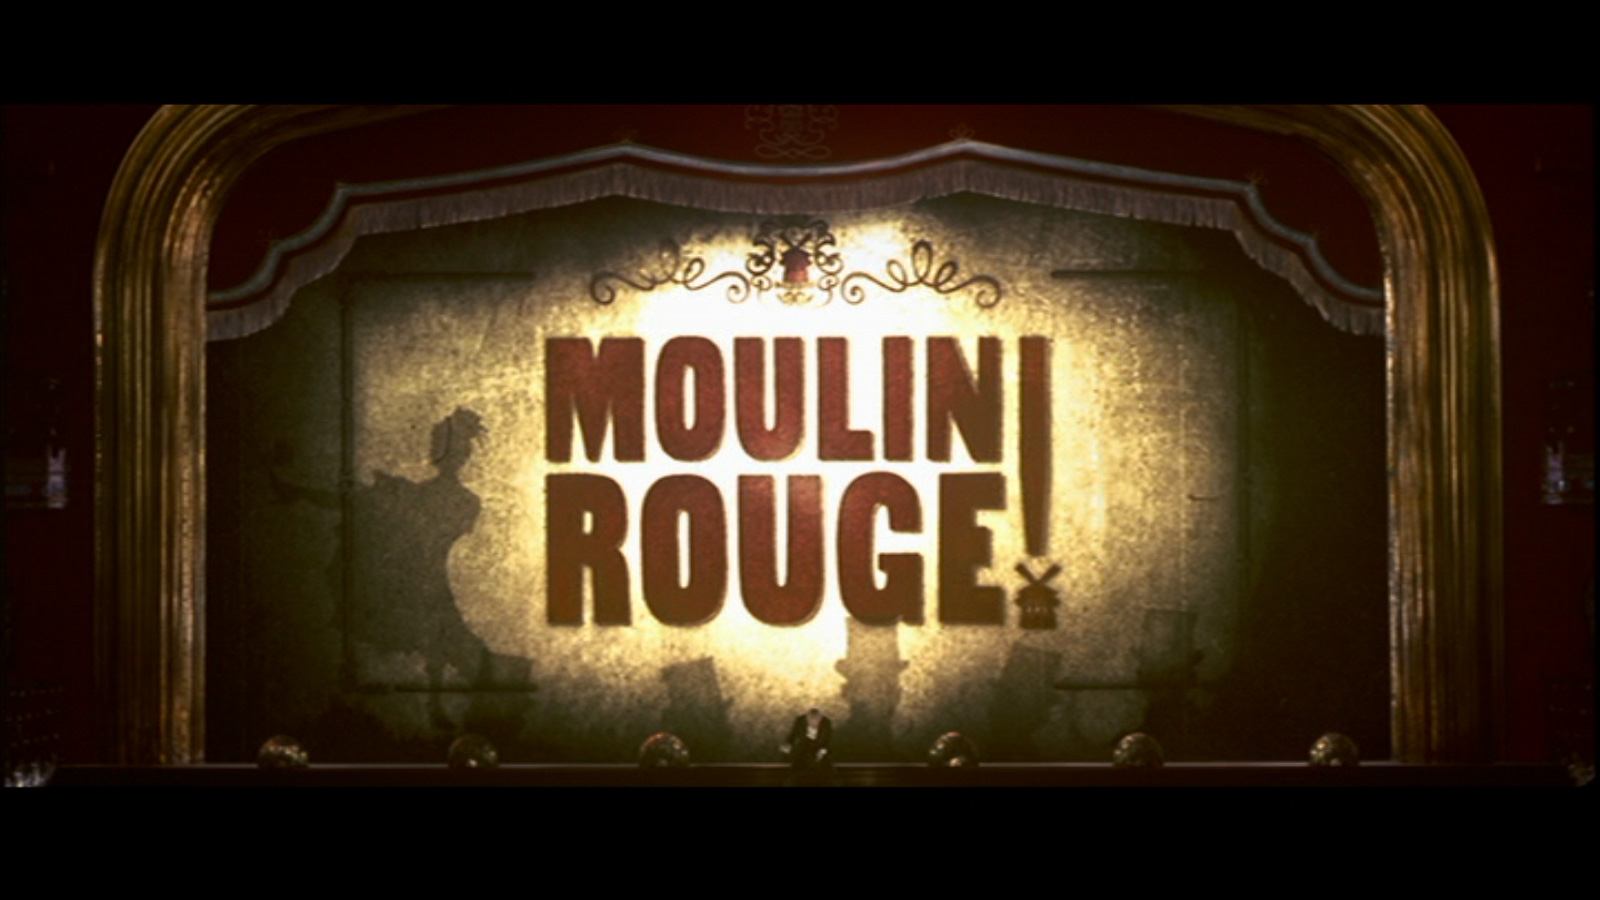 Moulin Rouge Image HD Wallpaper And